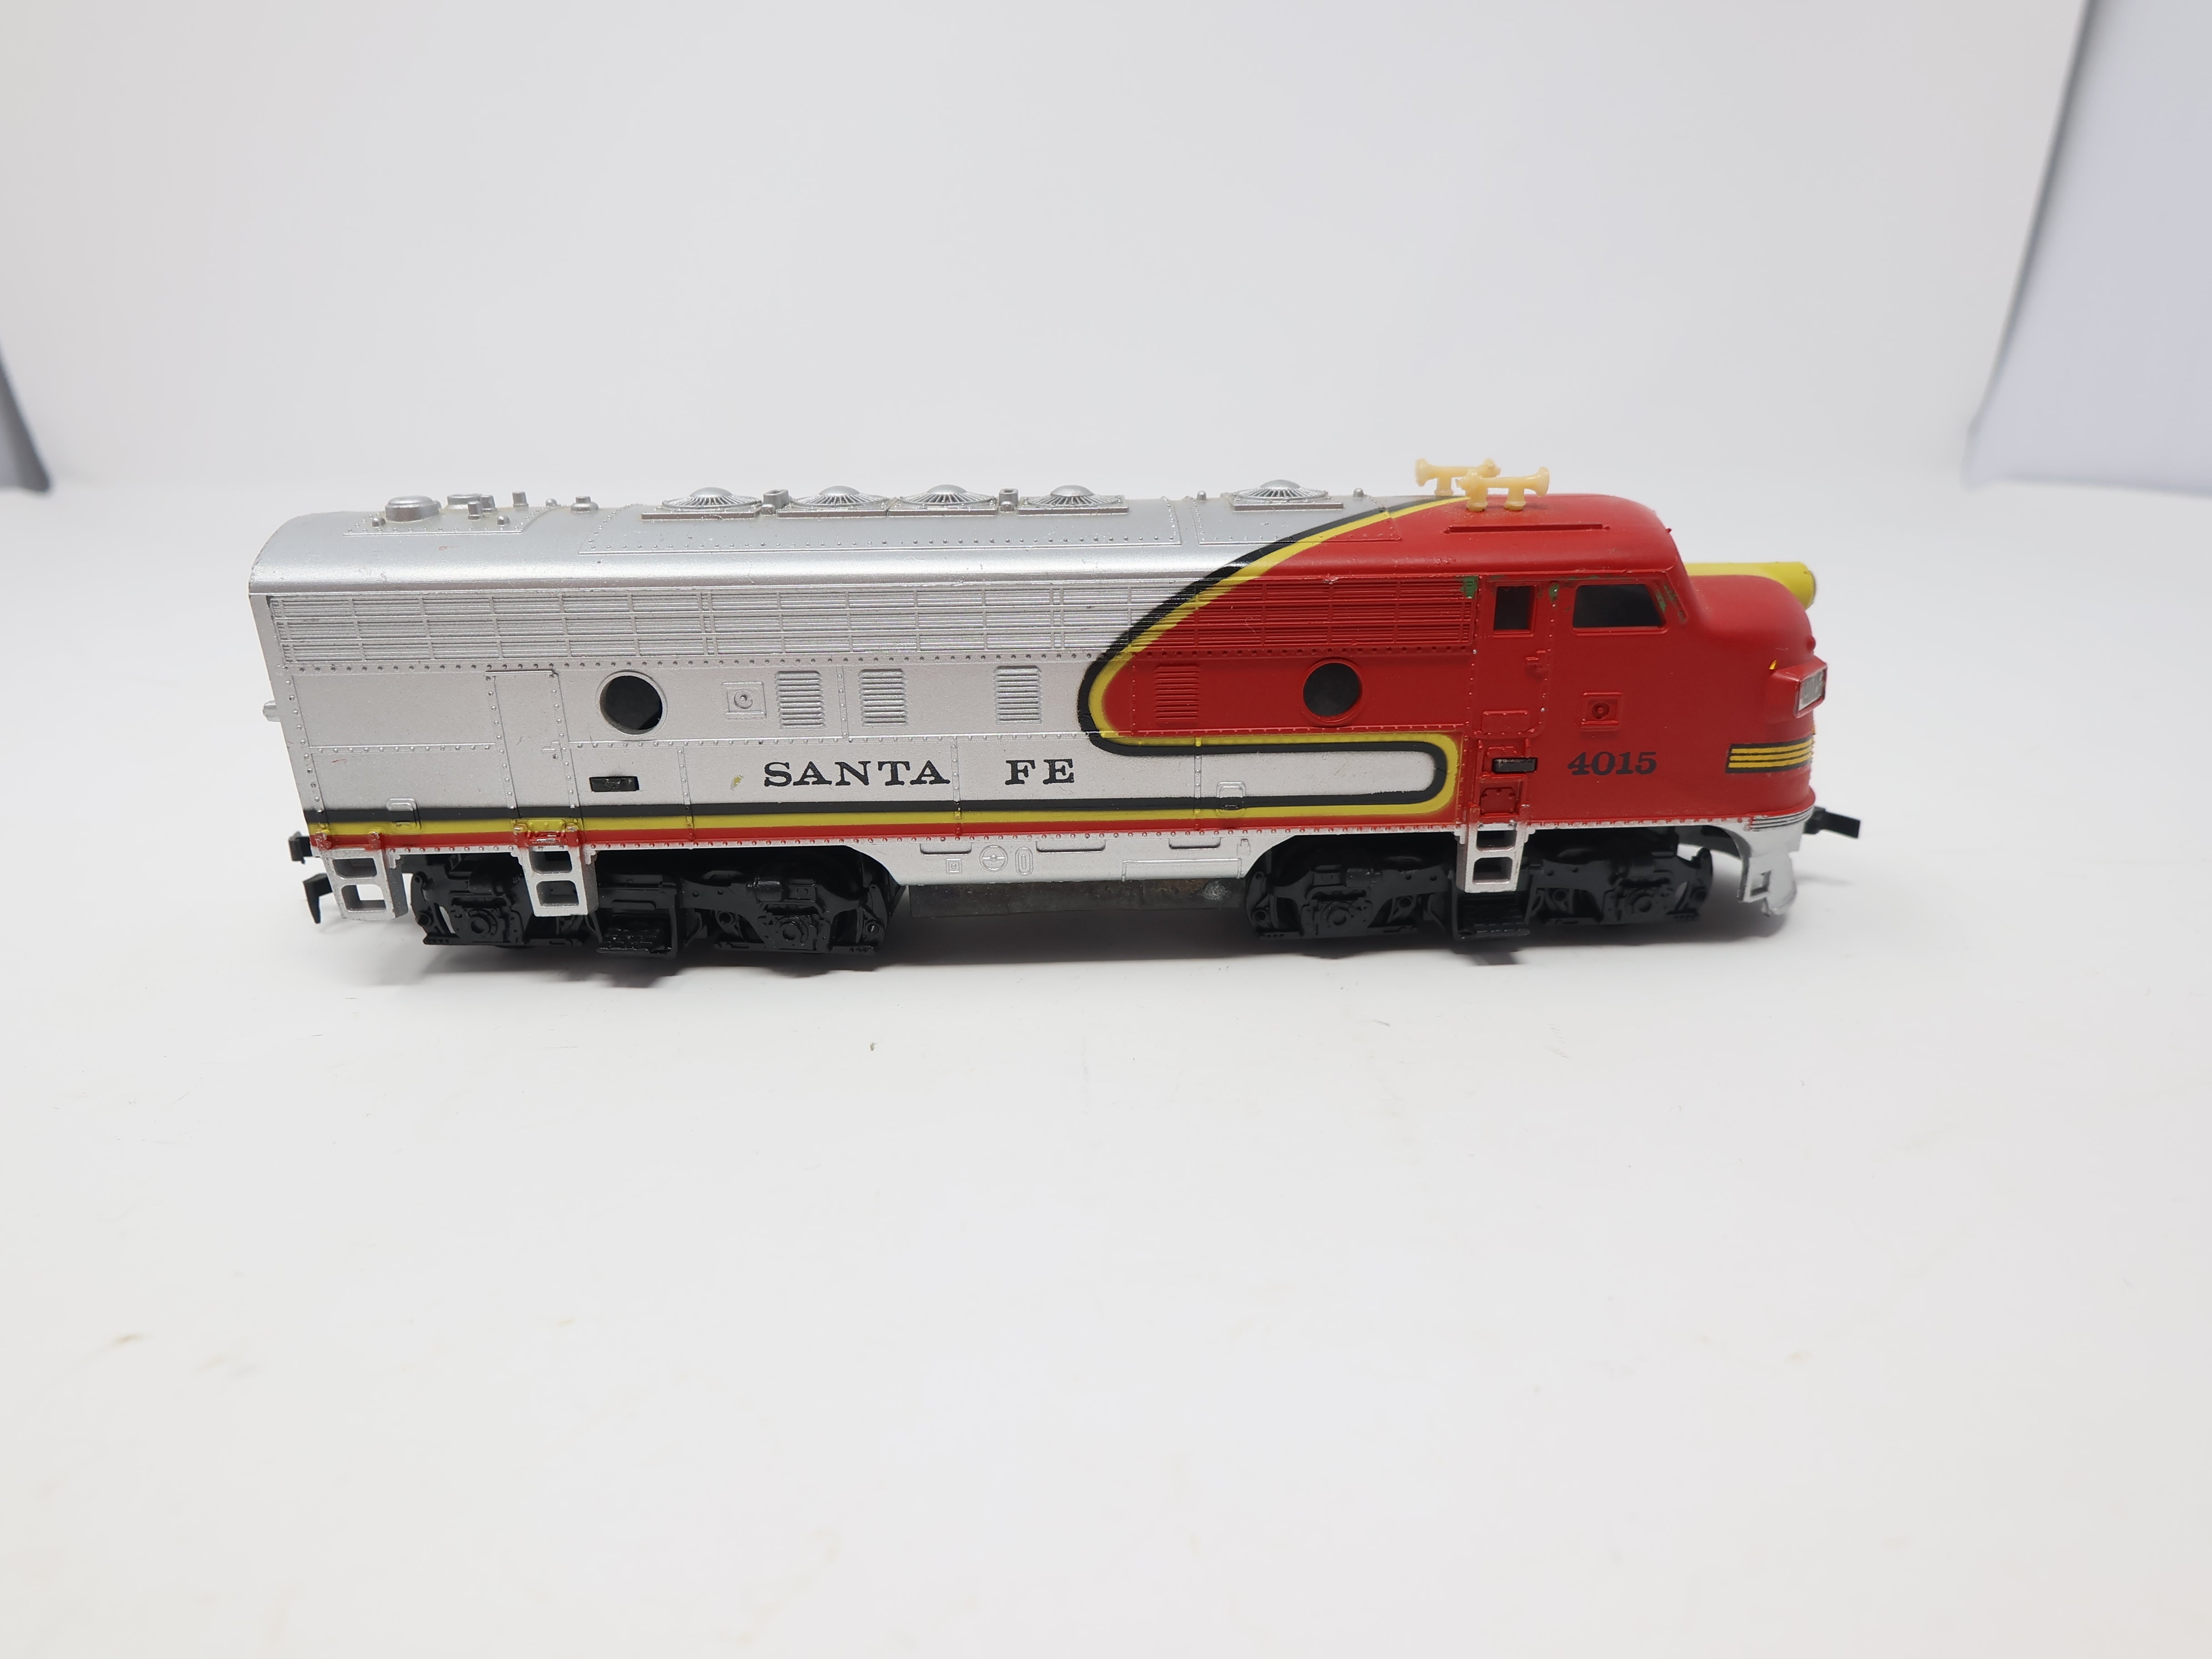 USED Tyco HO Scale, F7A Diesel Locomotive, Santa Fe #4015, Non-Powered